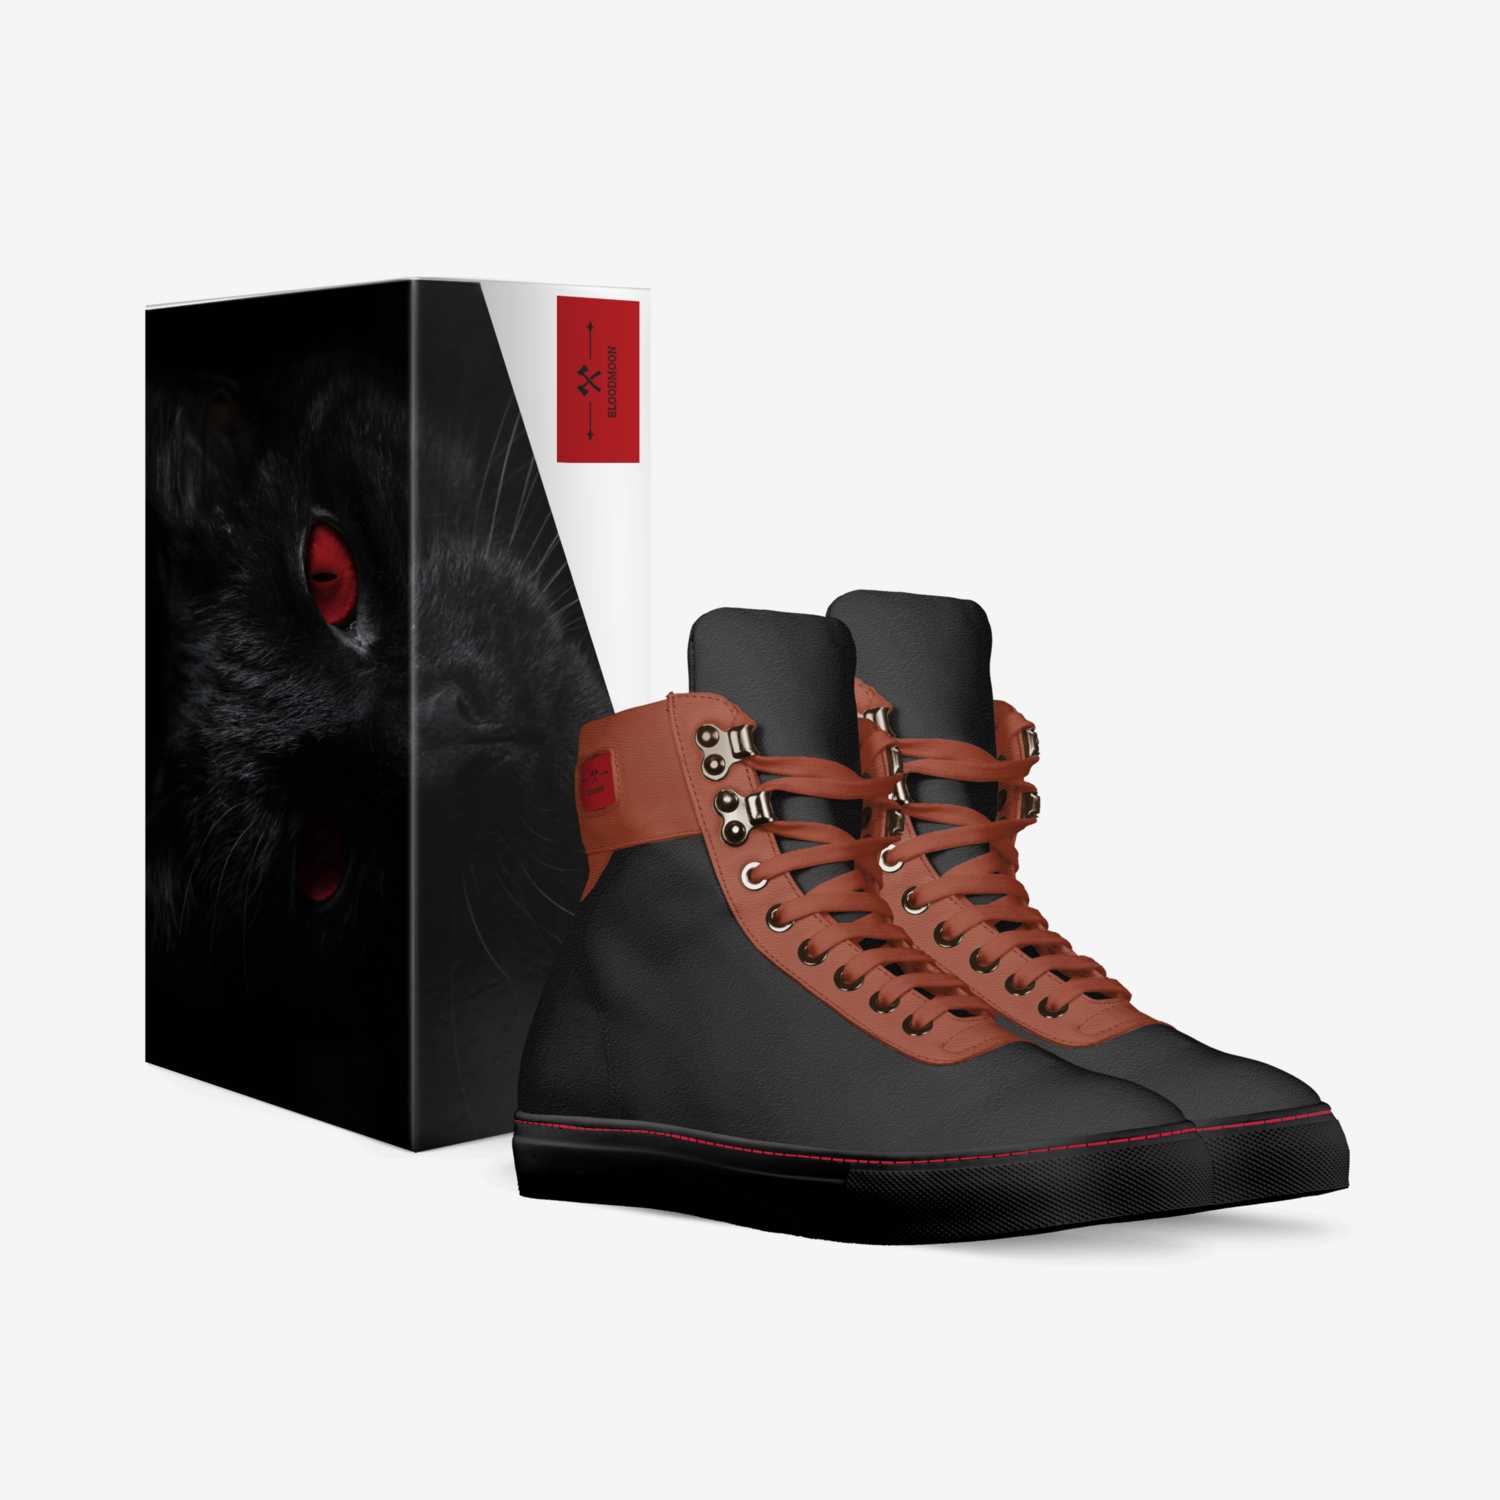 BloodMoon custom made in Italy shoes by William Drake | Box view